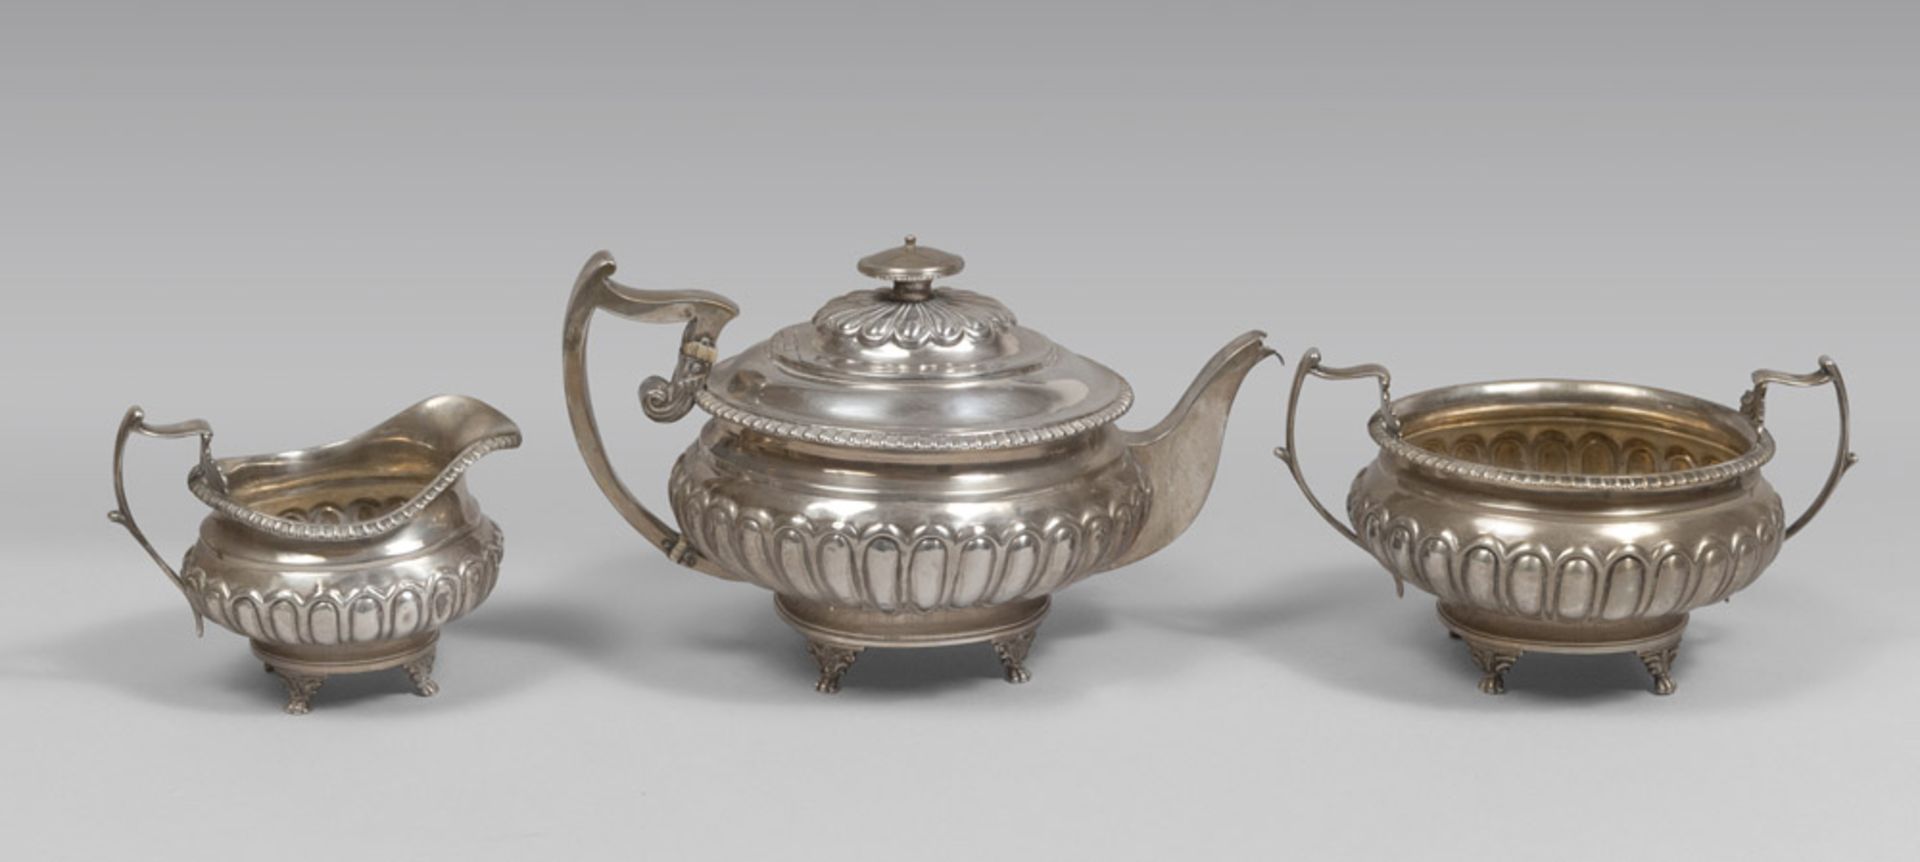 Three silverware pieces, composed of teapot, milk-pot and sugar bowl, punch Dublin 1813. Silversmith